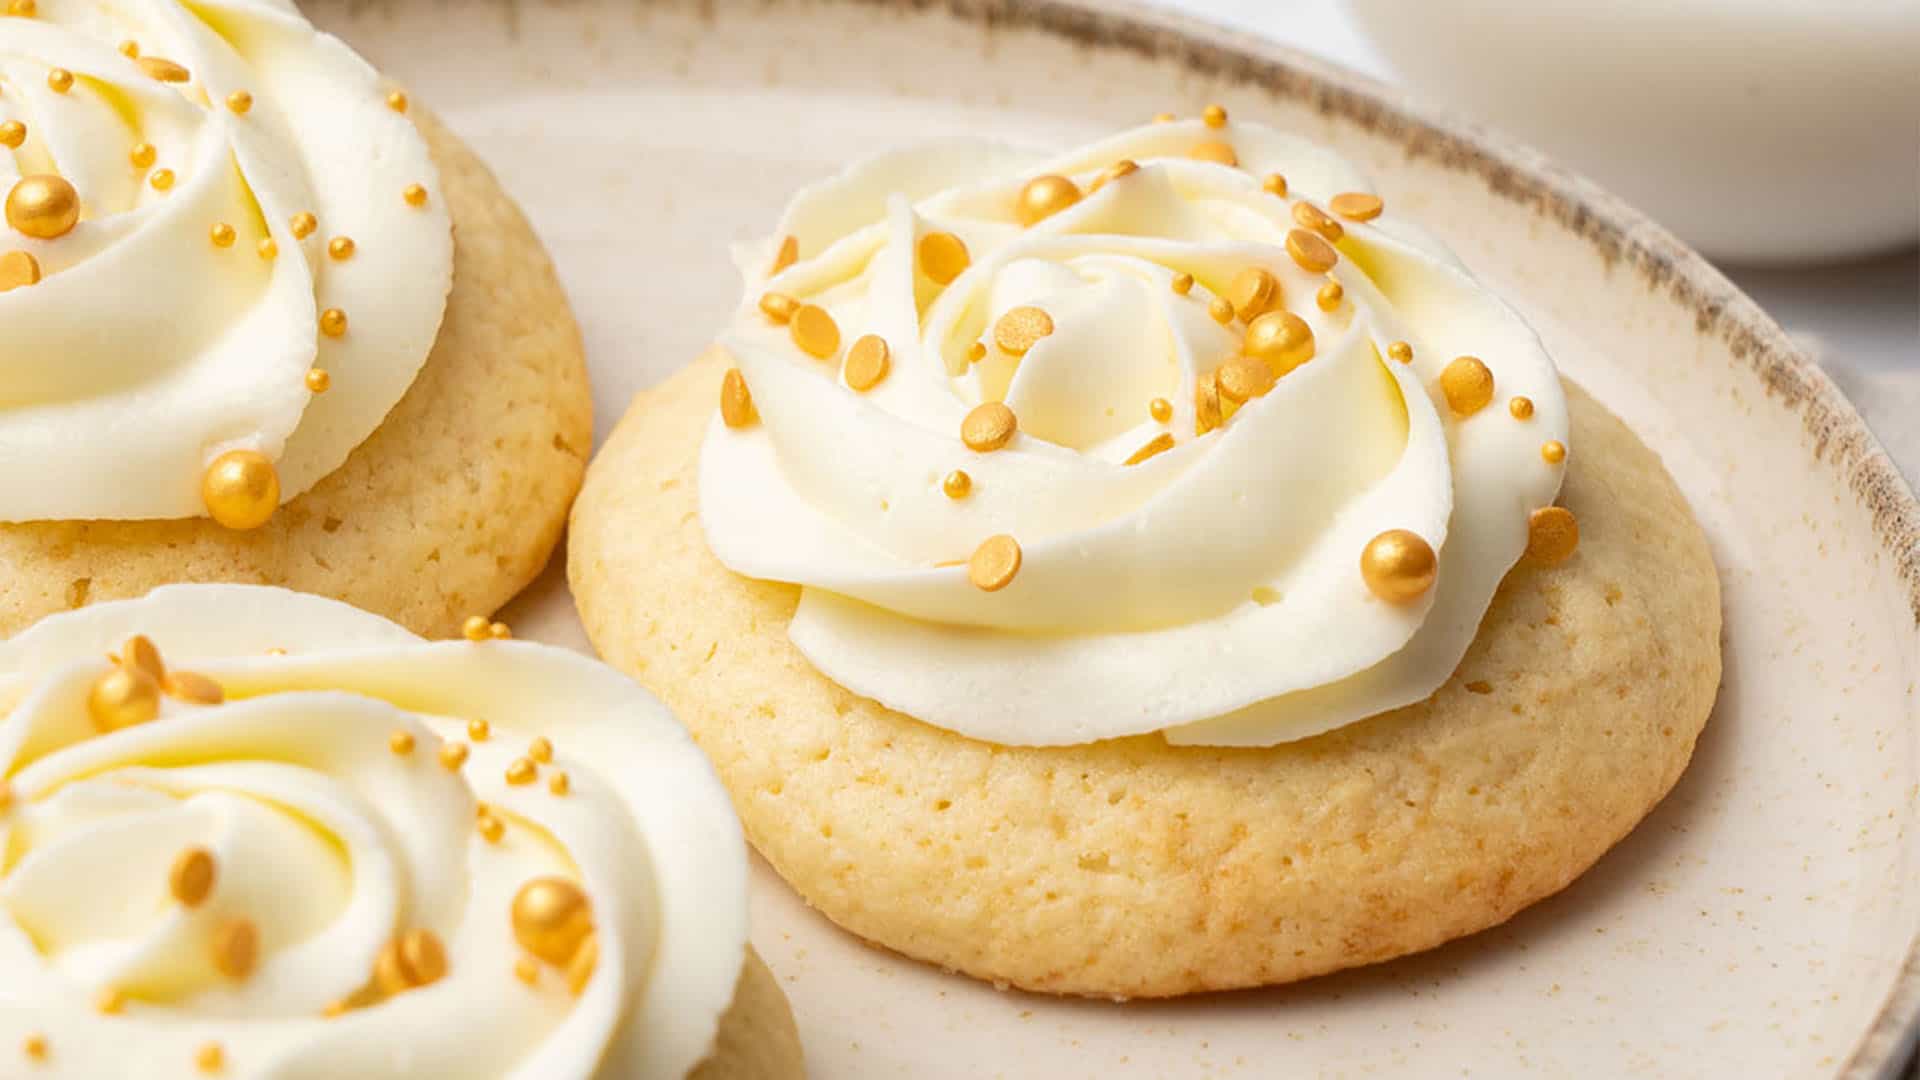 <p>Soft, fluffy, and oh-so-moist these <strong><a href="https://www.spatuladesserts.com/greek-yogurt-cookies/">Greek Yogurt Cookies</a></strong> are super easy to make and sure to satisfy your sweet tooth! Made with creamy Greek yogurt perfectly blended into the cookie dough and topped with my famous cream cheese frosting, these cookies redefine the meaning of simple and delicious!</p> <p><strong>Go to the recipe: <a href="https://www.spatuladesserts.com/greek-yogurt-cookies/">Greek Yogurt Cookies</a></strong></p>